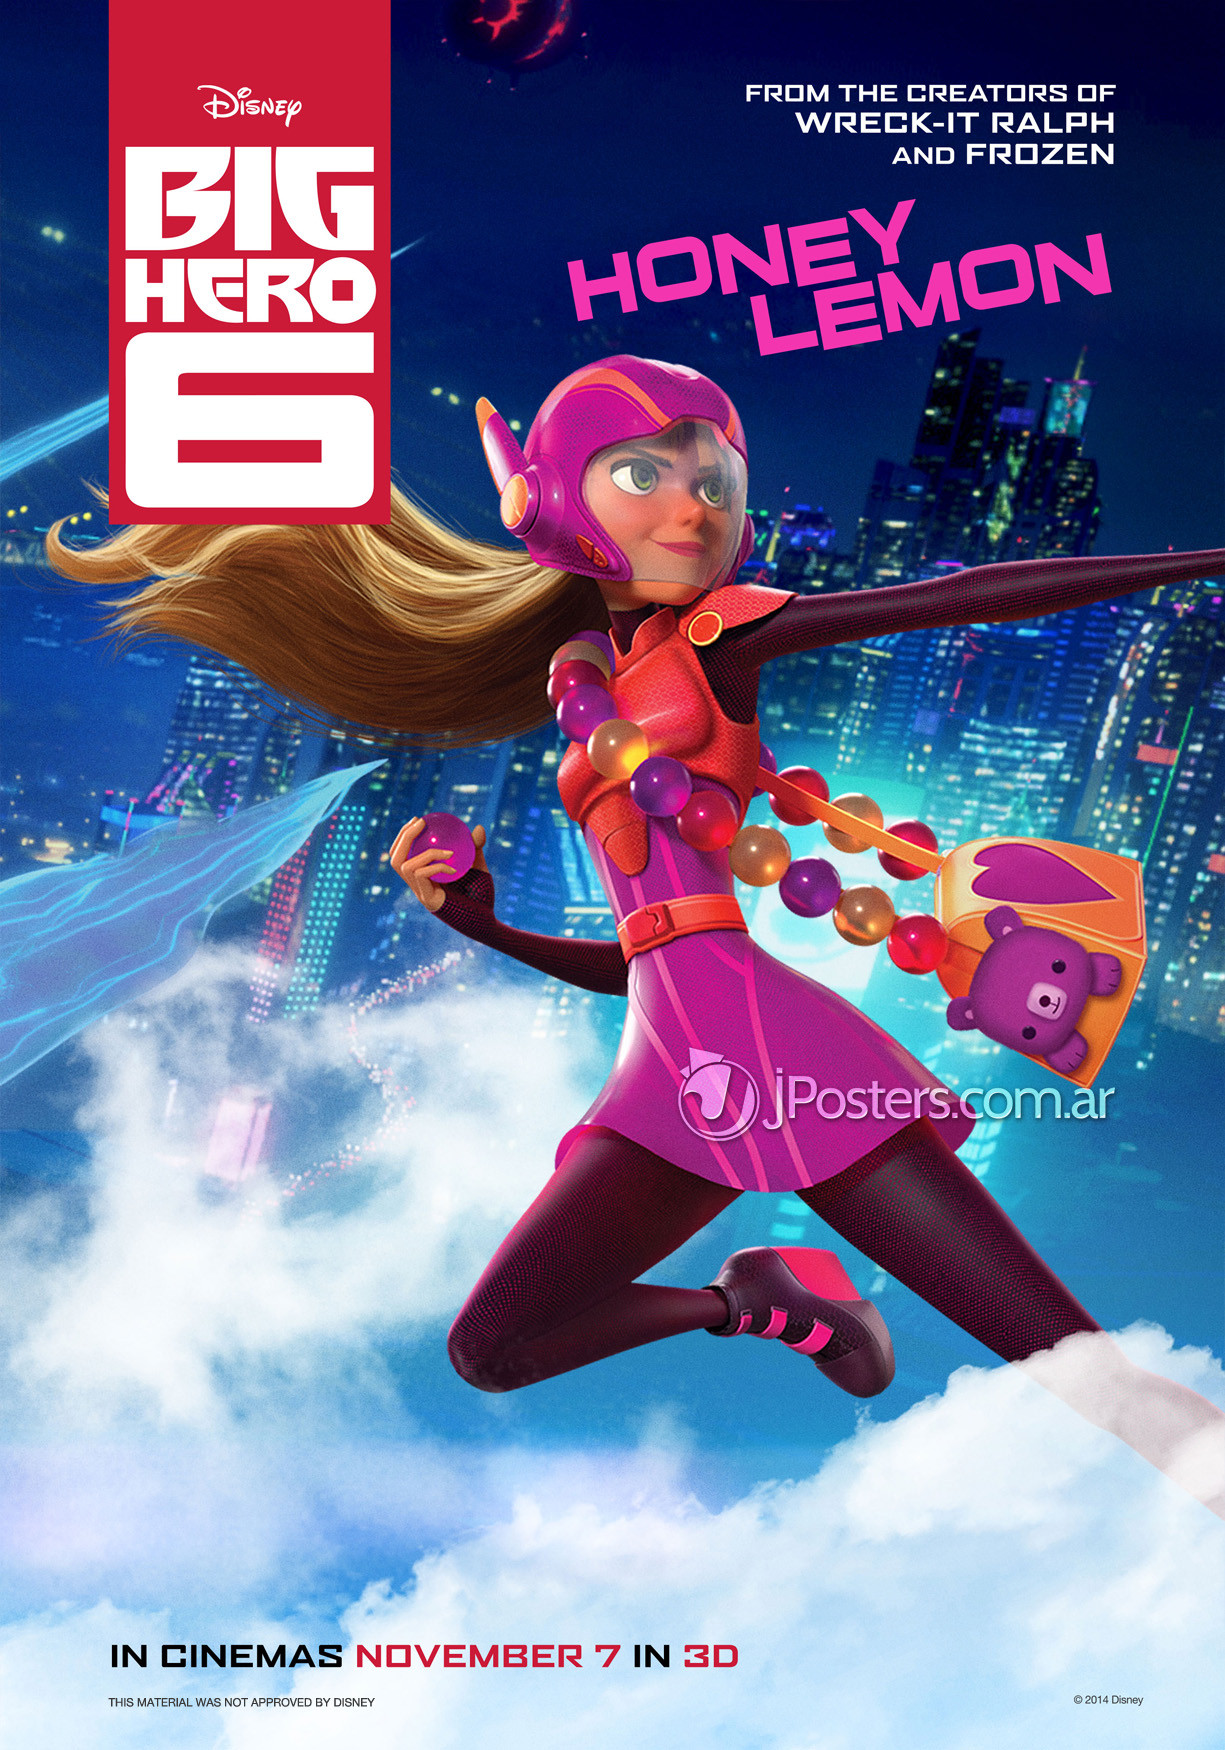 6 New Character Posters For Marvel And Disneys Big Hero 6 We